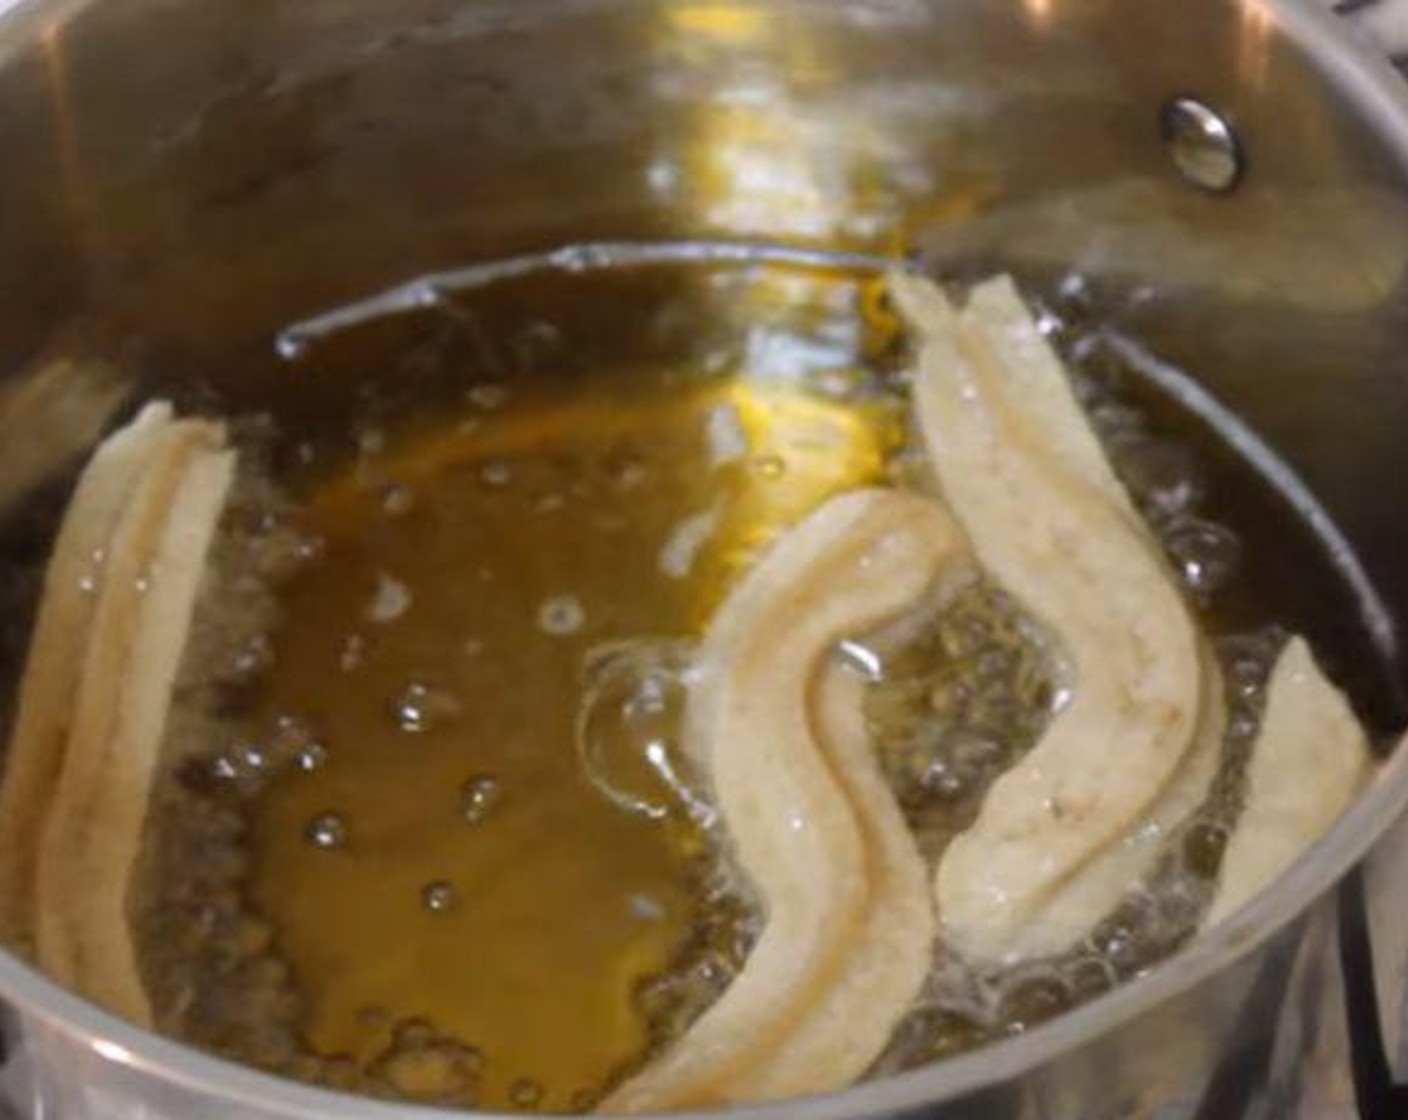 step 3 Heat a pan with Frying Oil (as needed). Fill a piping bag with the batter, then start piping 5-inch strips of batter into the hot oil. Fry for about 3-4 minutes. Make sure not to overcrowd the pan. Drain on a paper towel.